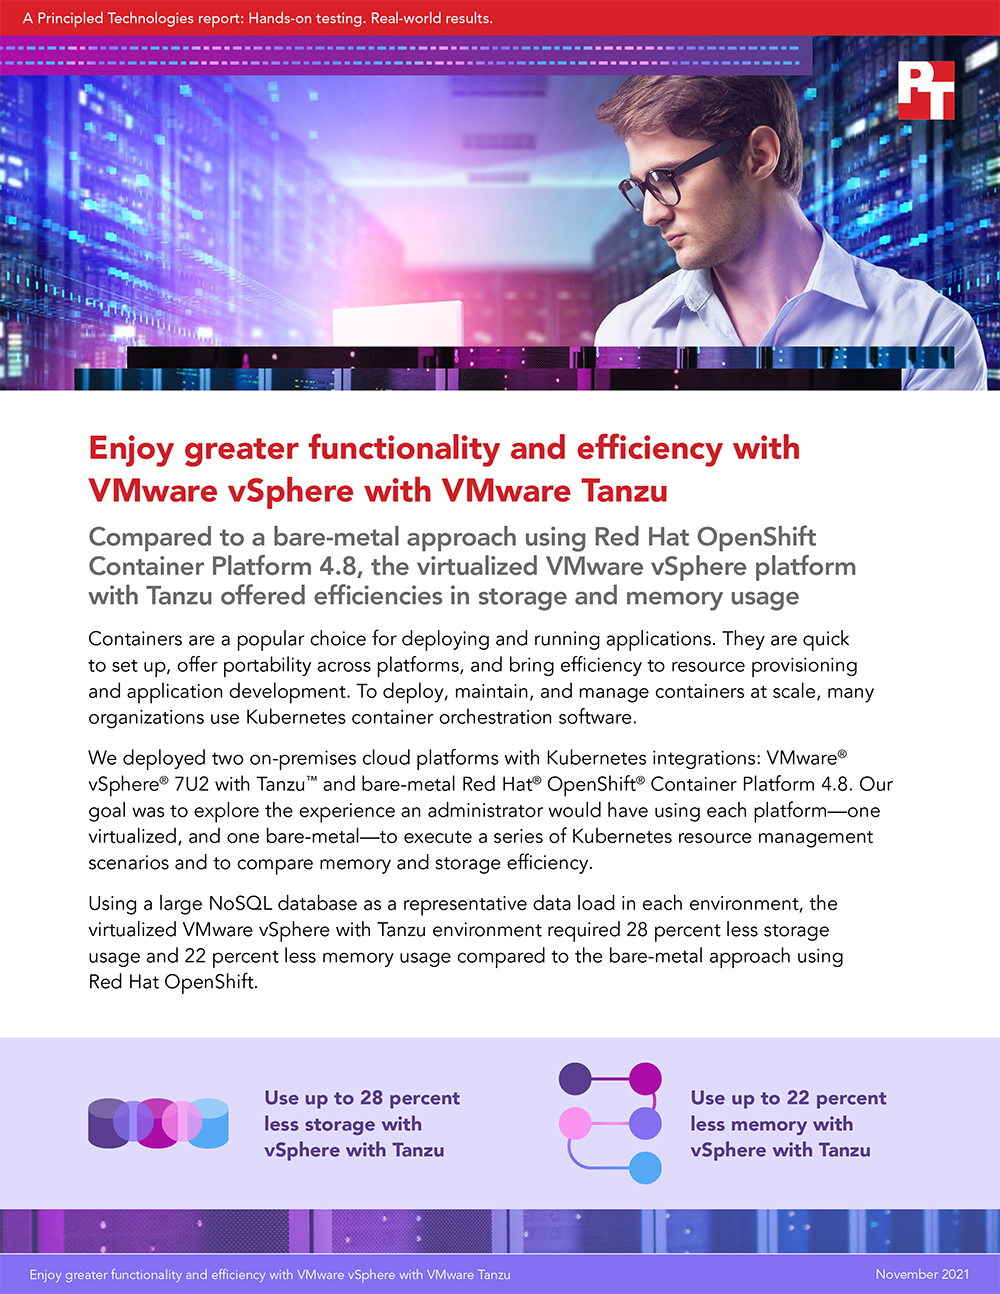  Enjoy greater functionality and efficiency with VMware vSphere with VMware Tanzu